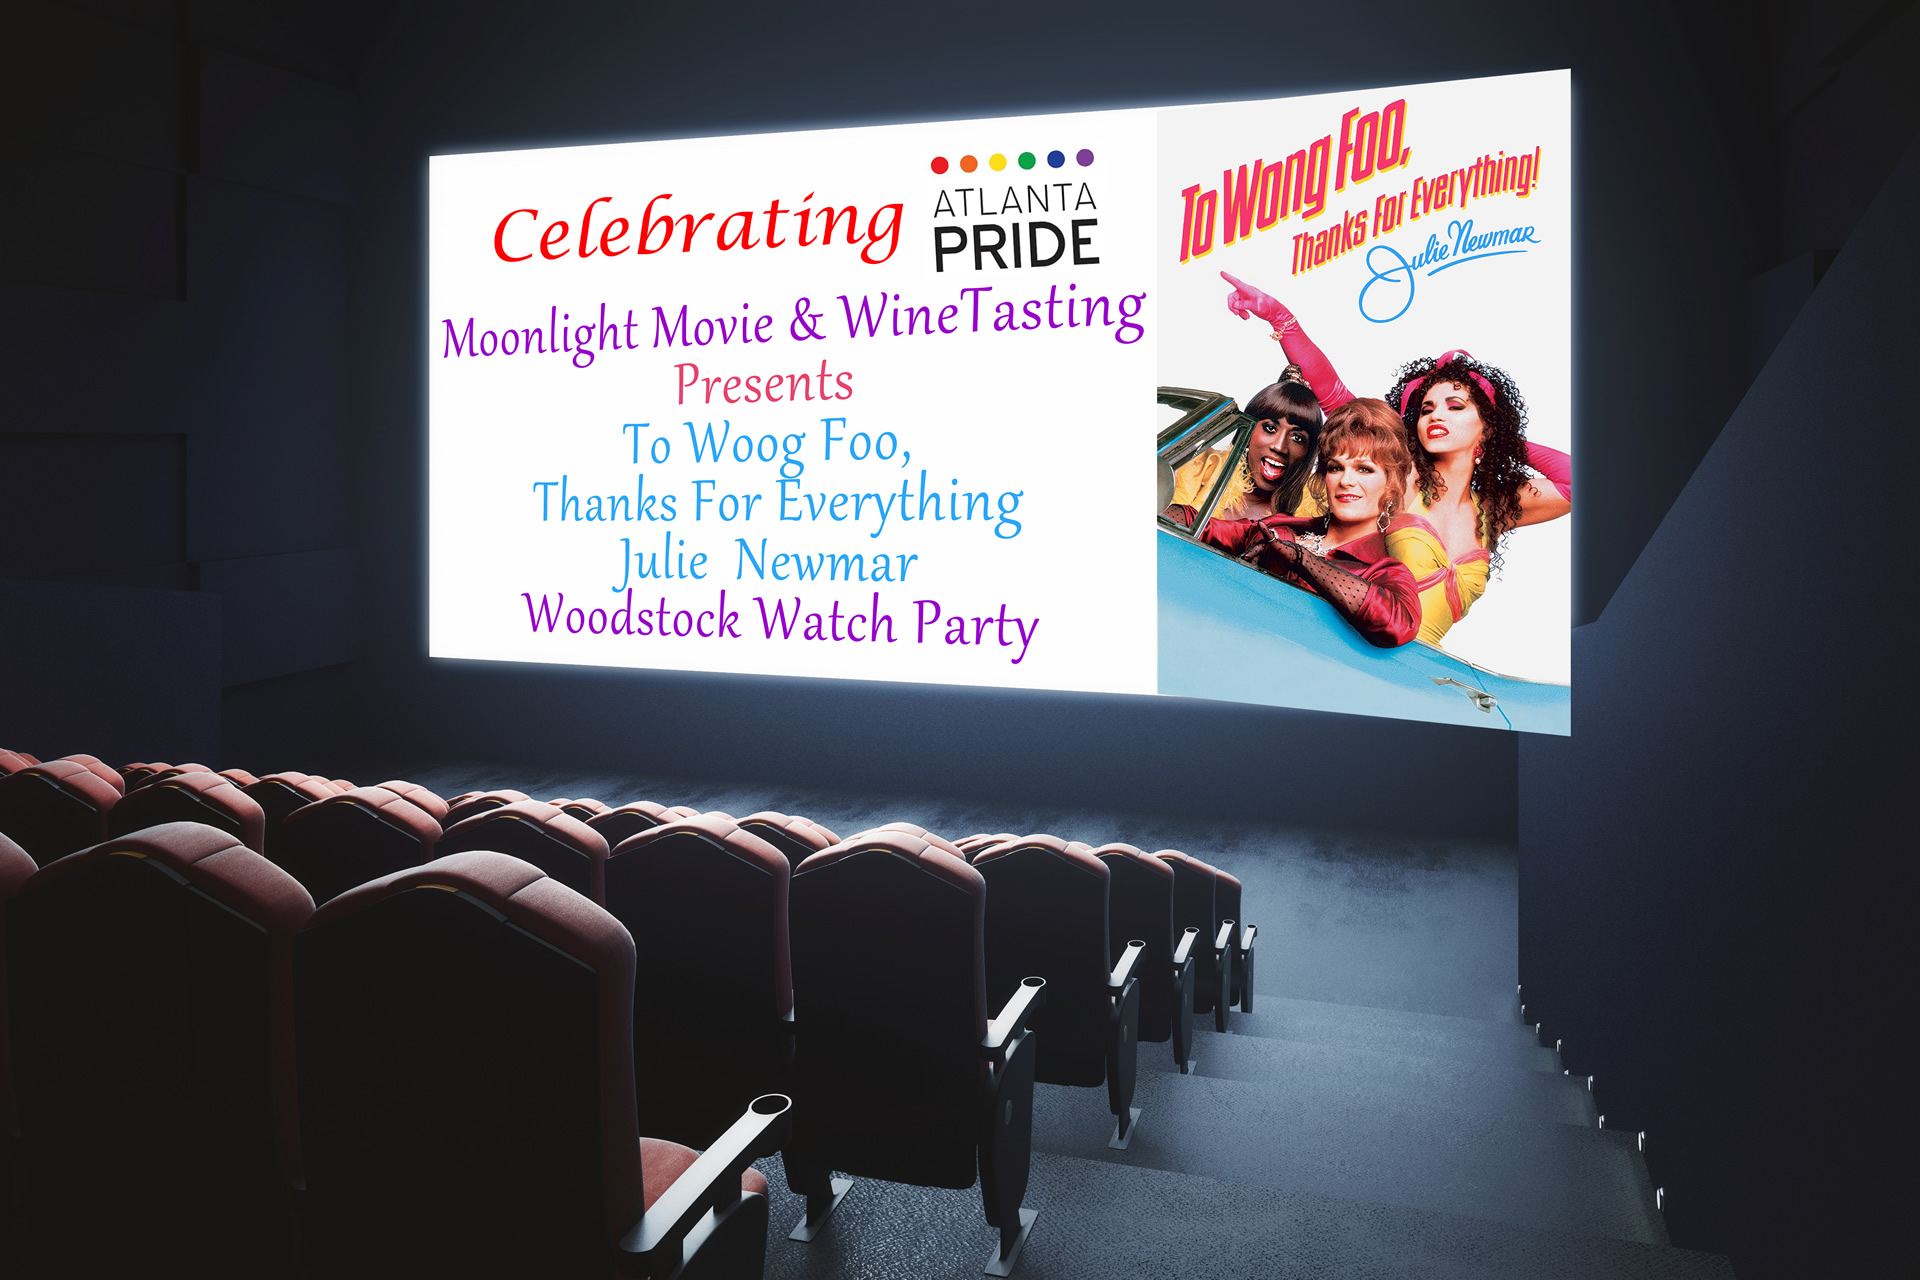 Moonlight Movies & Wine Tastings Retro Drive In - To Wong Foo, Thanks for Everything! Julie Newmar